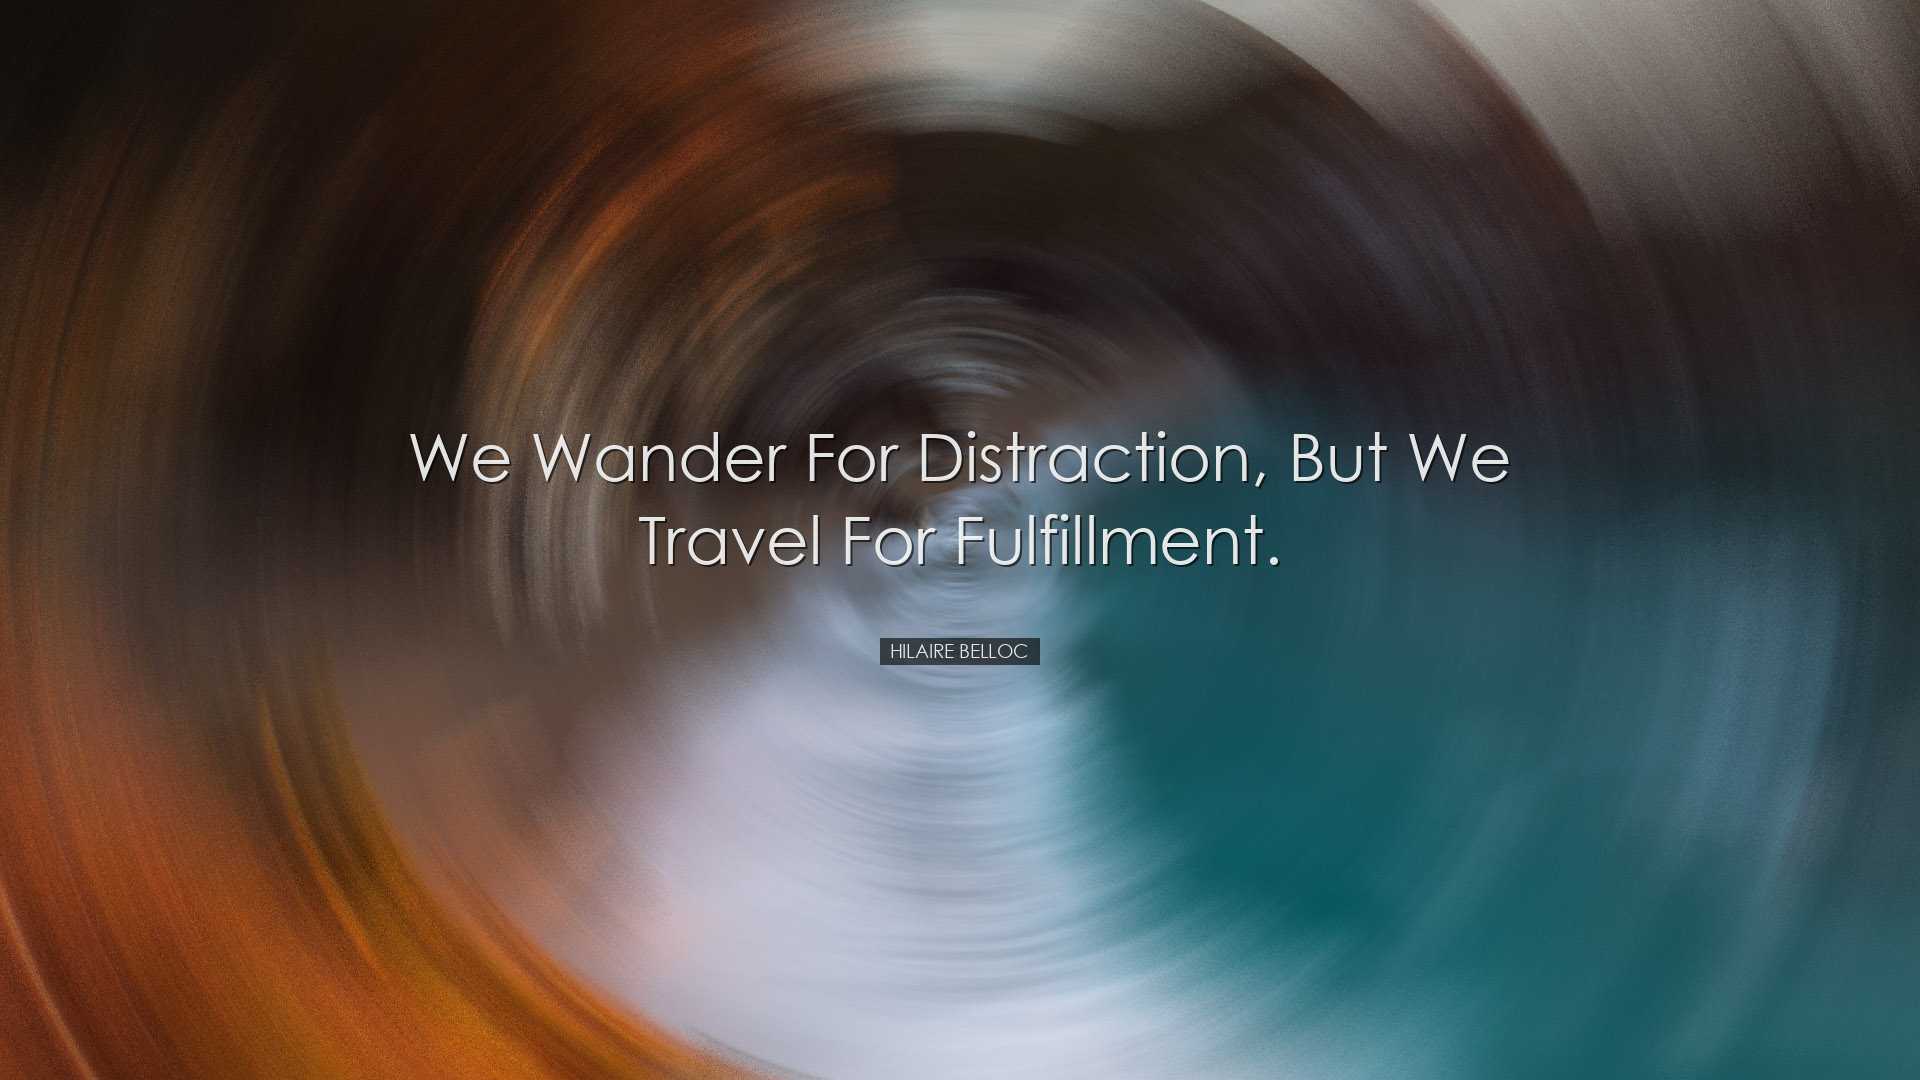 We wander for distraction, but we travel for fulfillment. - Hilair